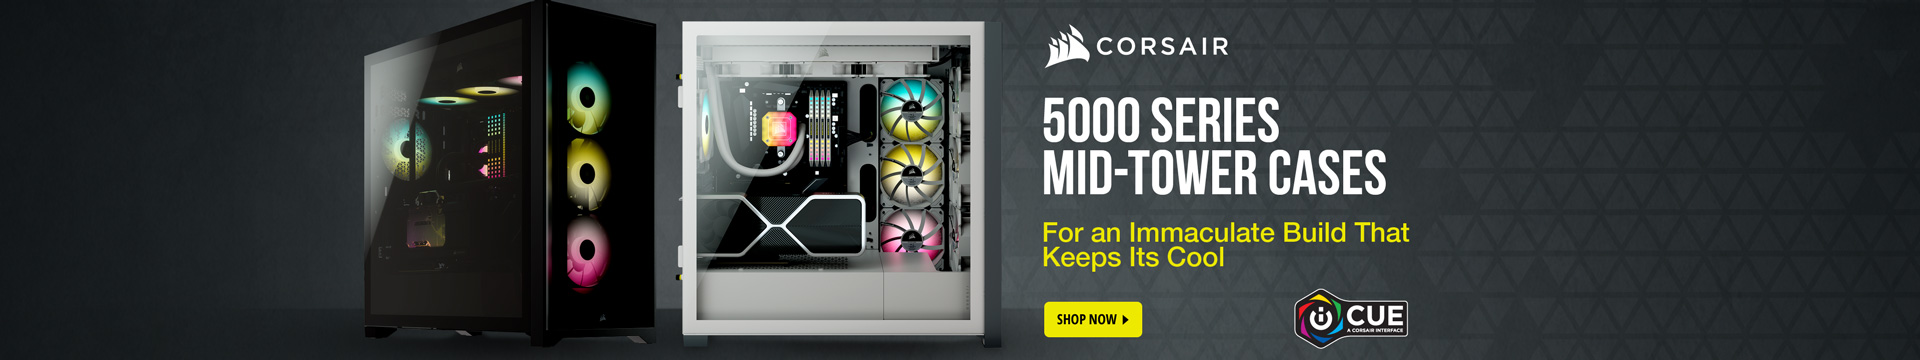 5000 SERIES MID-TOWER CASES